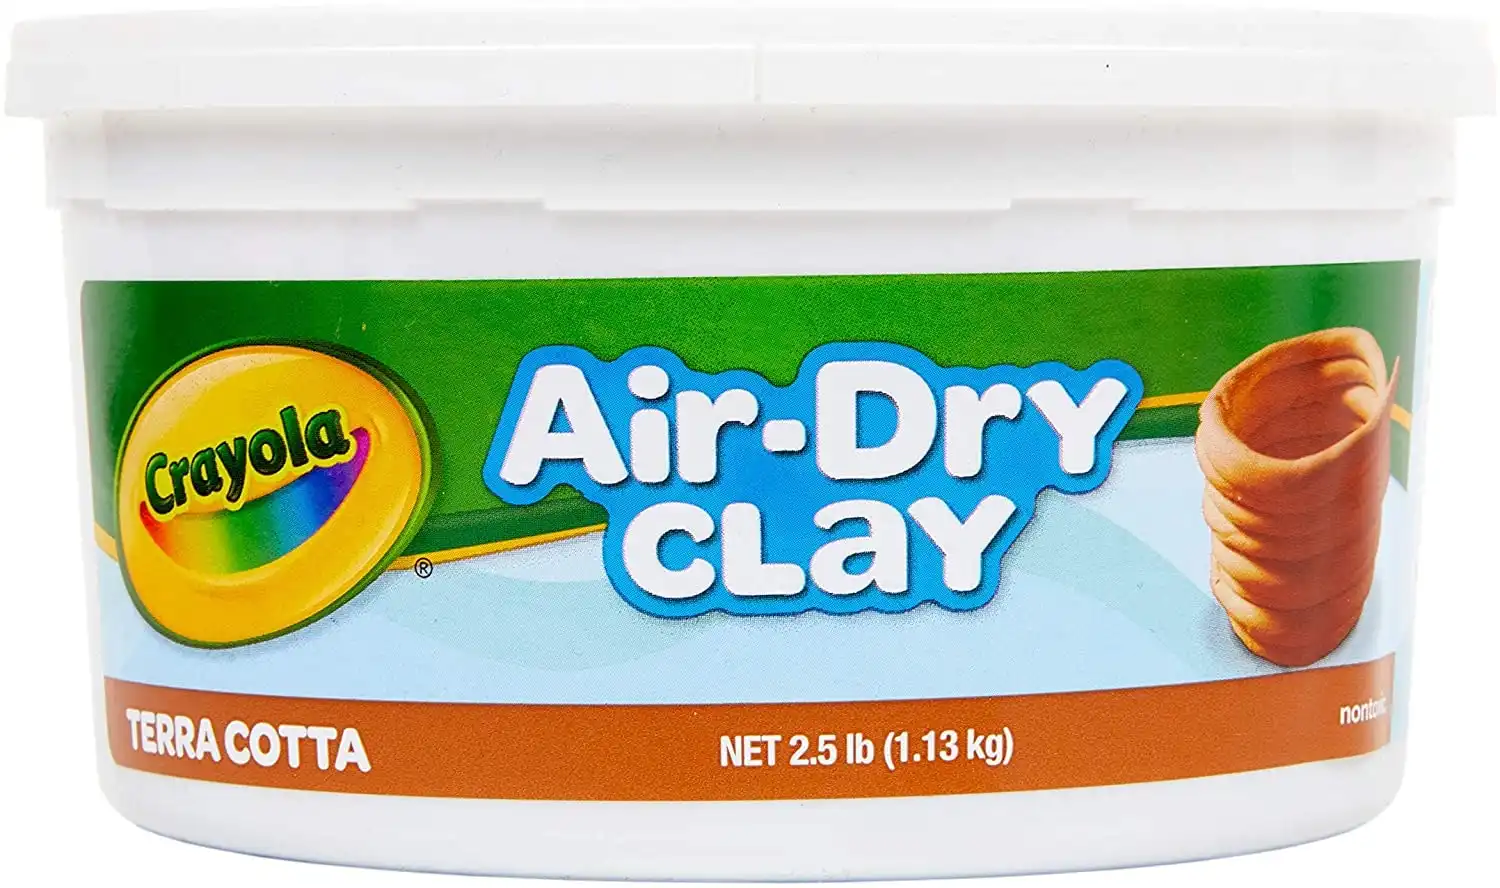 Crayola 1.13 Air Dry Clay Terracotta Colour Sculpt Model Clay Great For Art Projects! Crayola